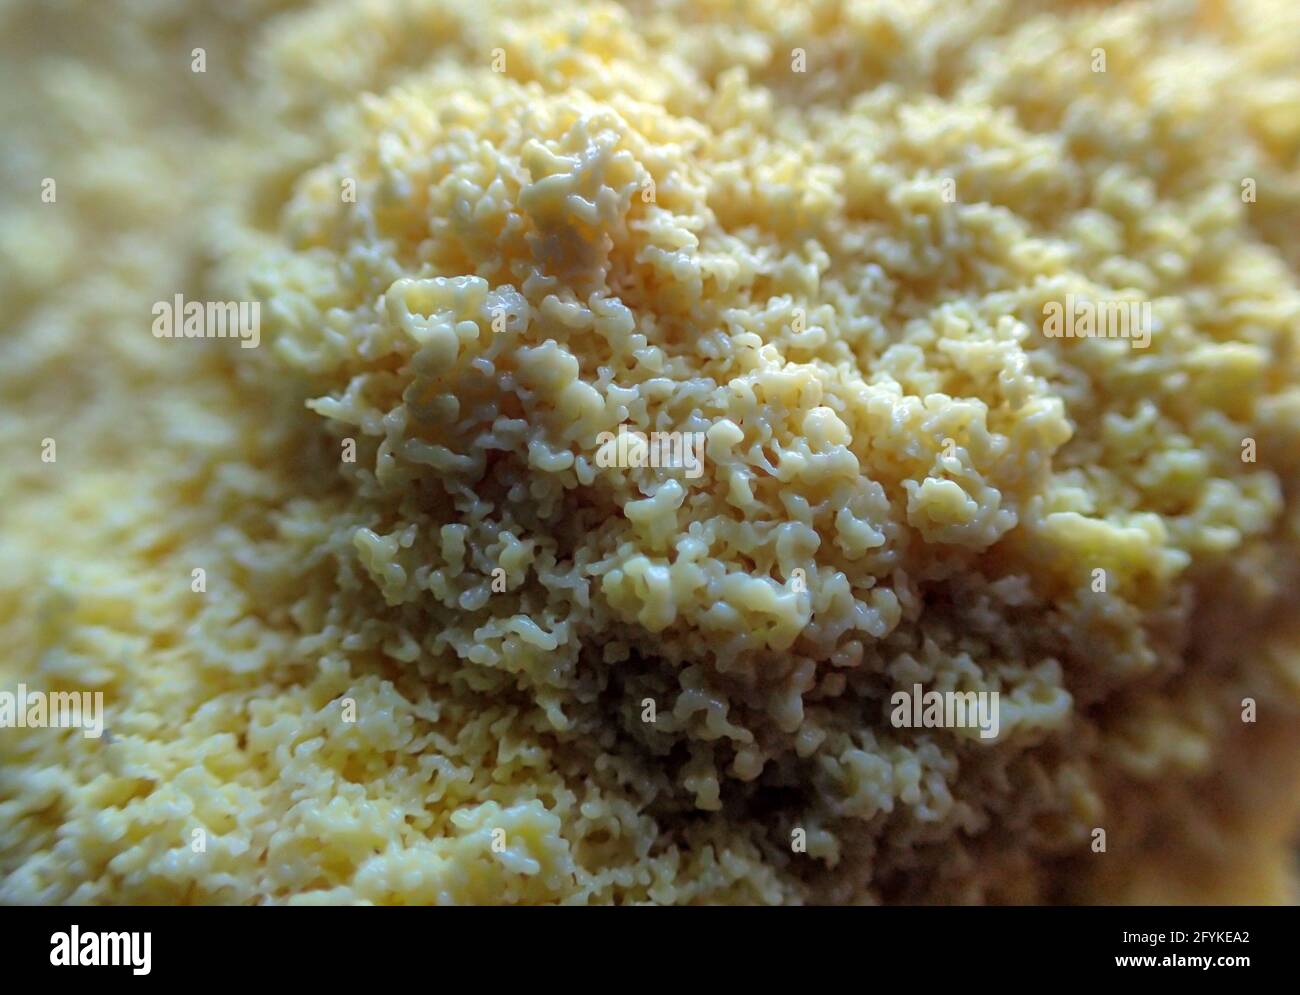 With a bokeh effect, the macro photographer draws attention to the detail in the center of this glob of yellow slime mold found growing in Missouri. Stock Photo